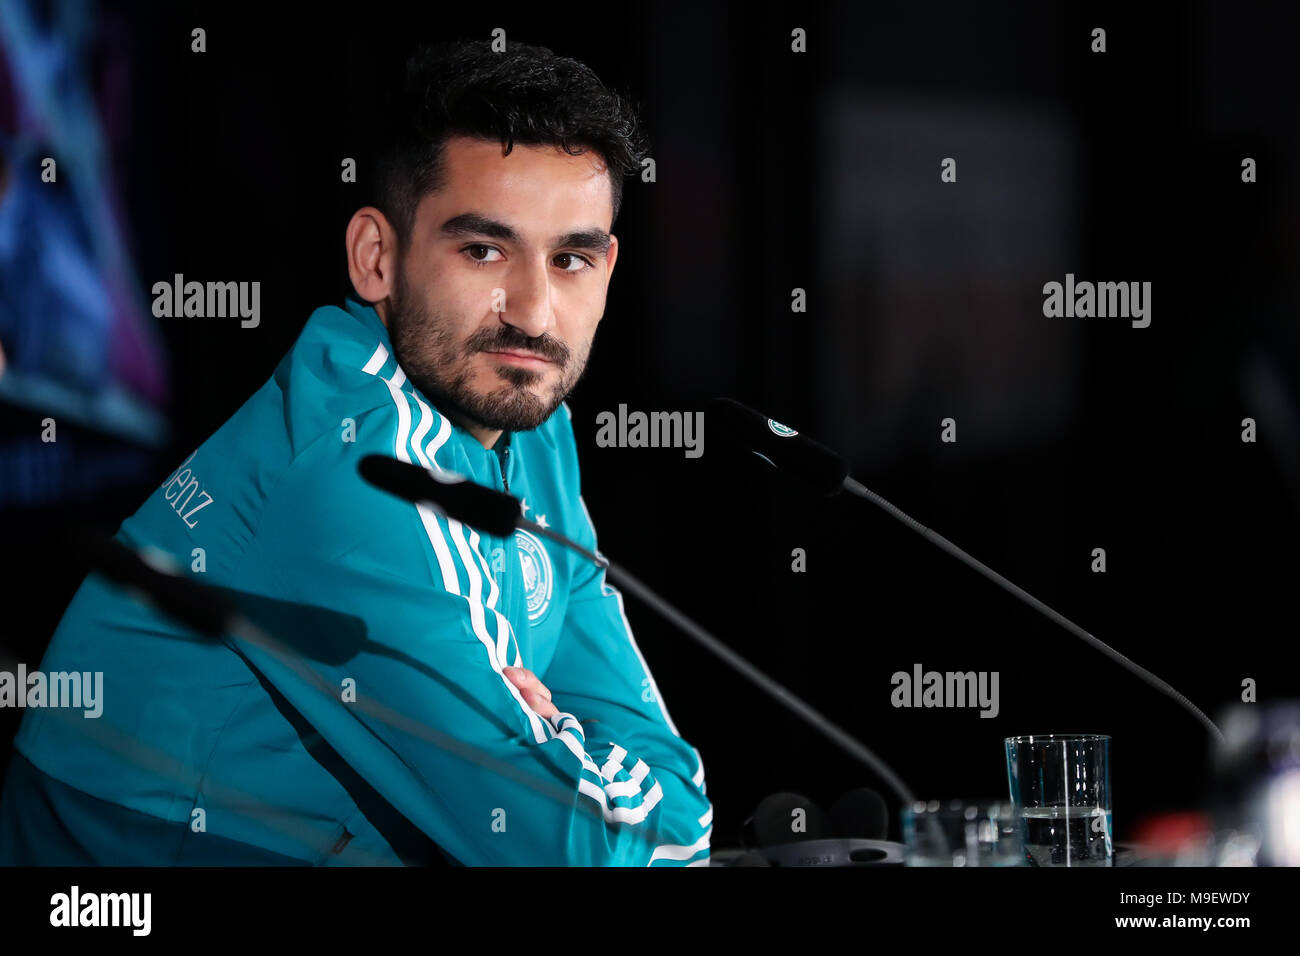 25 March 2018, Germany, Berlin: The German national team gives a press conference shortly before their game against Brazil. Player Ilkay Gündogan appears on stage. Photo: Christian Charisius/dpa Stock Photo